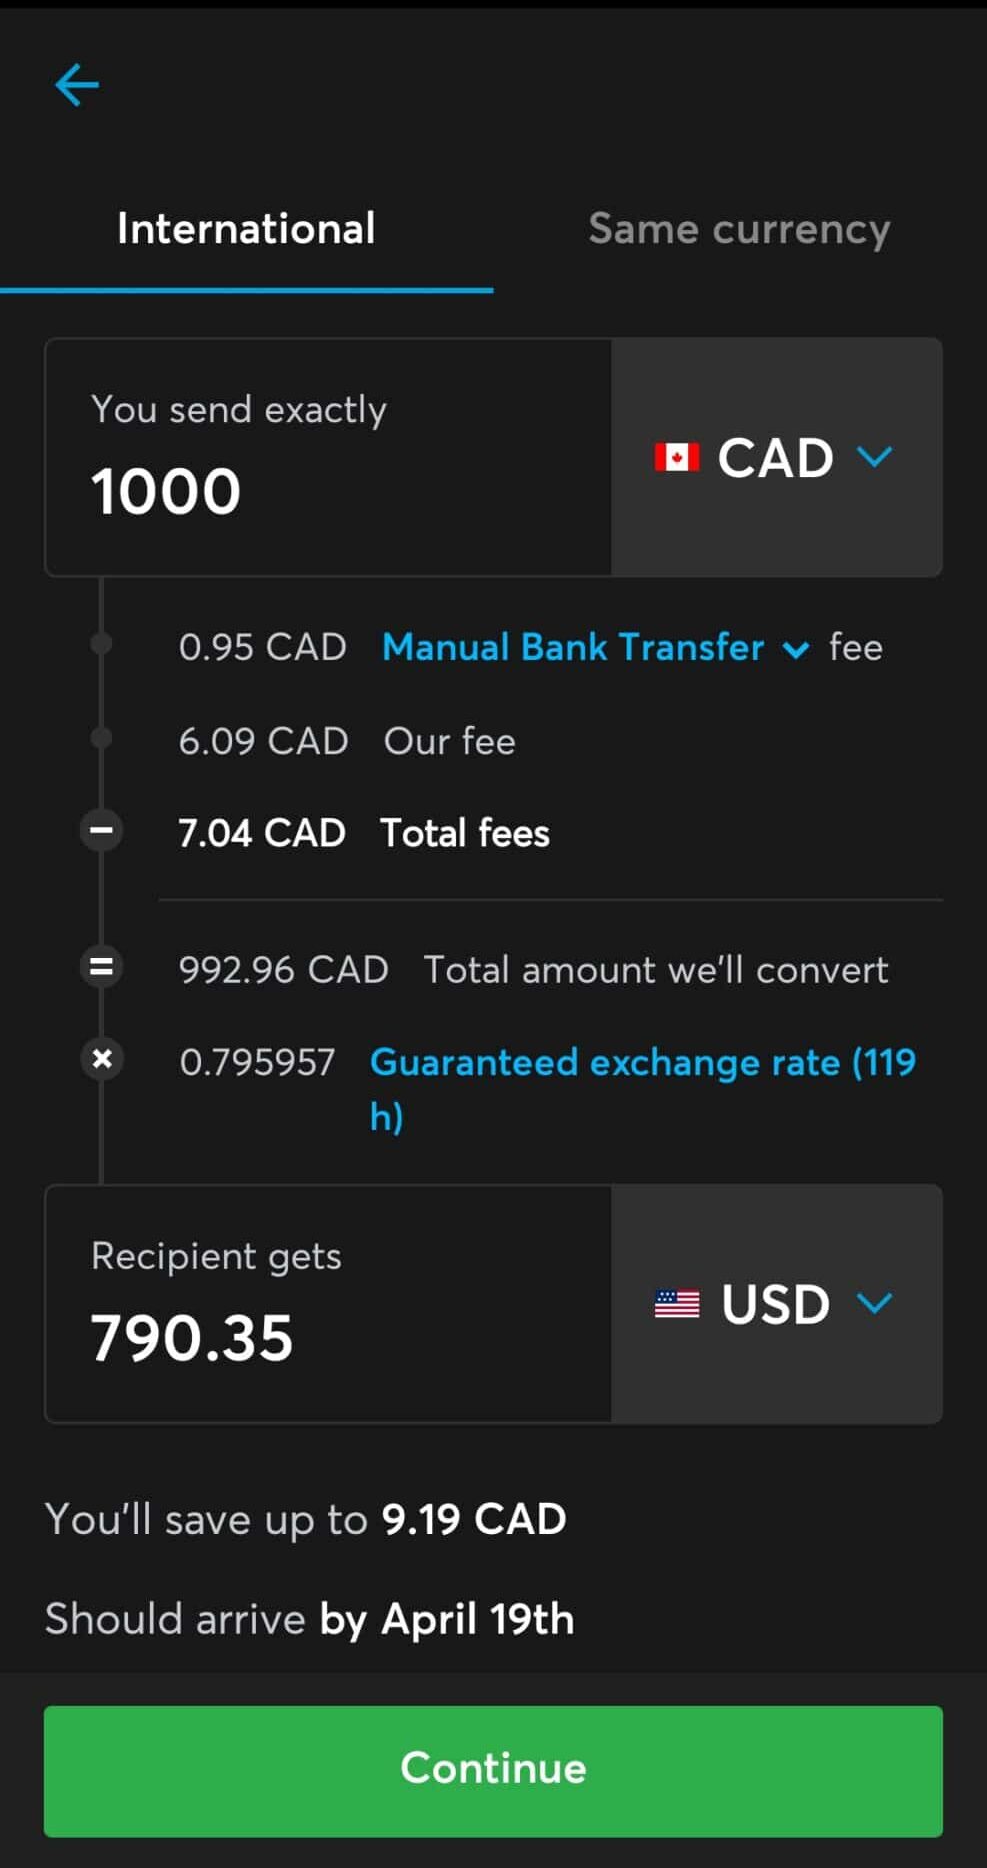 Wise manual bank transfer of $1000 CAD to USD